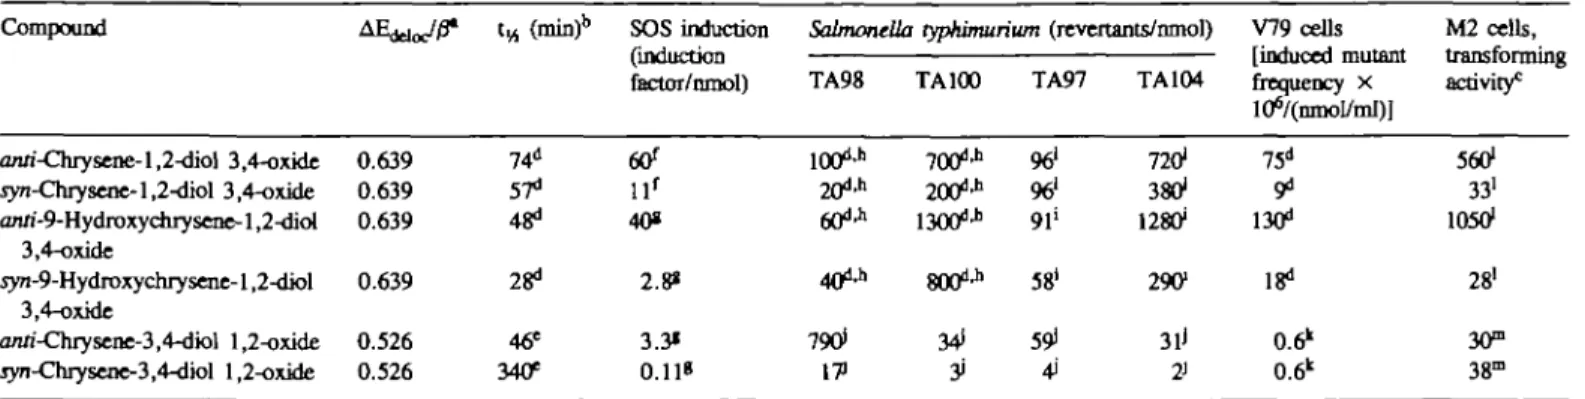 Table I.  A E ^ j ^ value, half-life, response in the in mouse M2 cells of chrysene diol-epoxides Compound anri-Chrysene-l,2-dk&gt;l 3,4-oxide jyn-Chrysene-l,2-diol 3,4-oxide an/i-9-Hydroxychrysene-1,2-diol 3,4-oxide yvn-9-Hydroxychrysene-1,2-diol 3,4-oxid